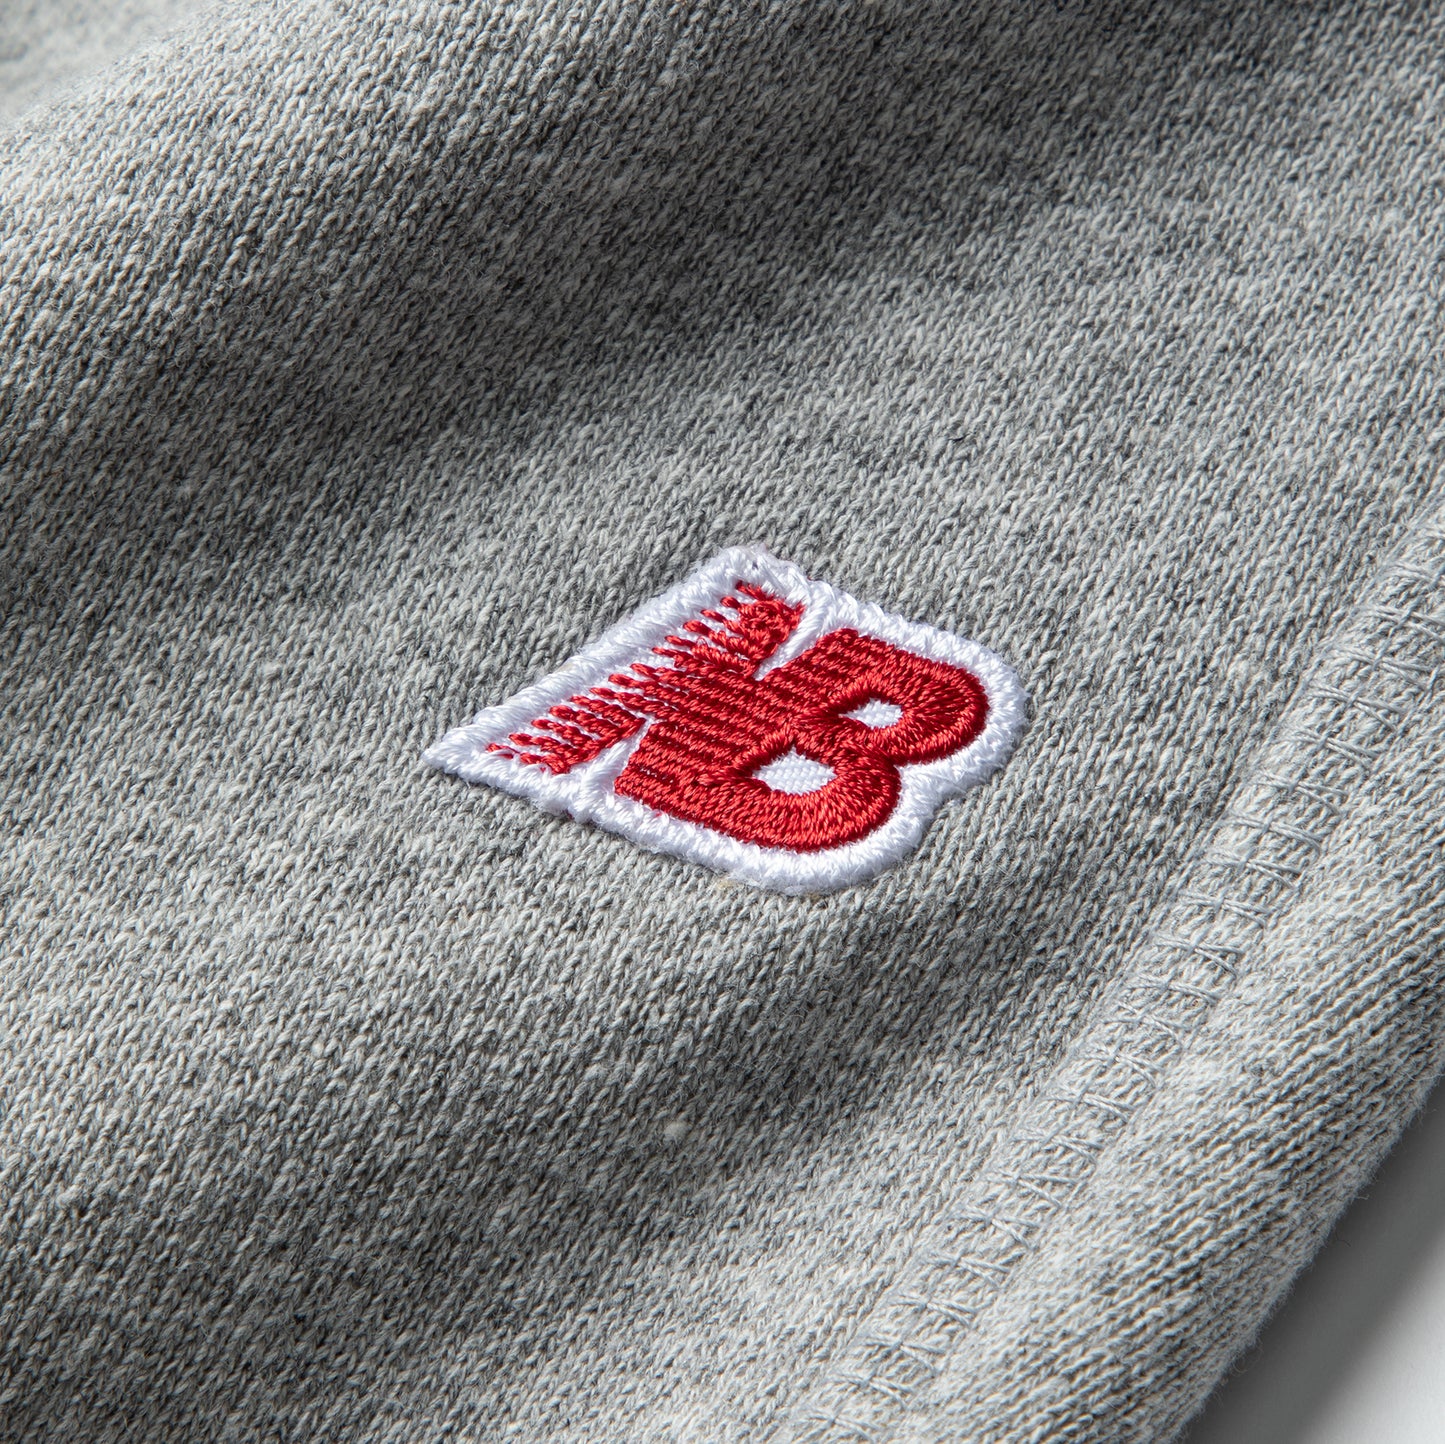 New Balance MADE in USA Core Sweatpant (Athletic Grey)